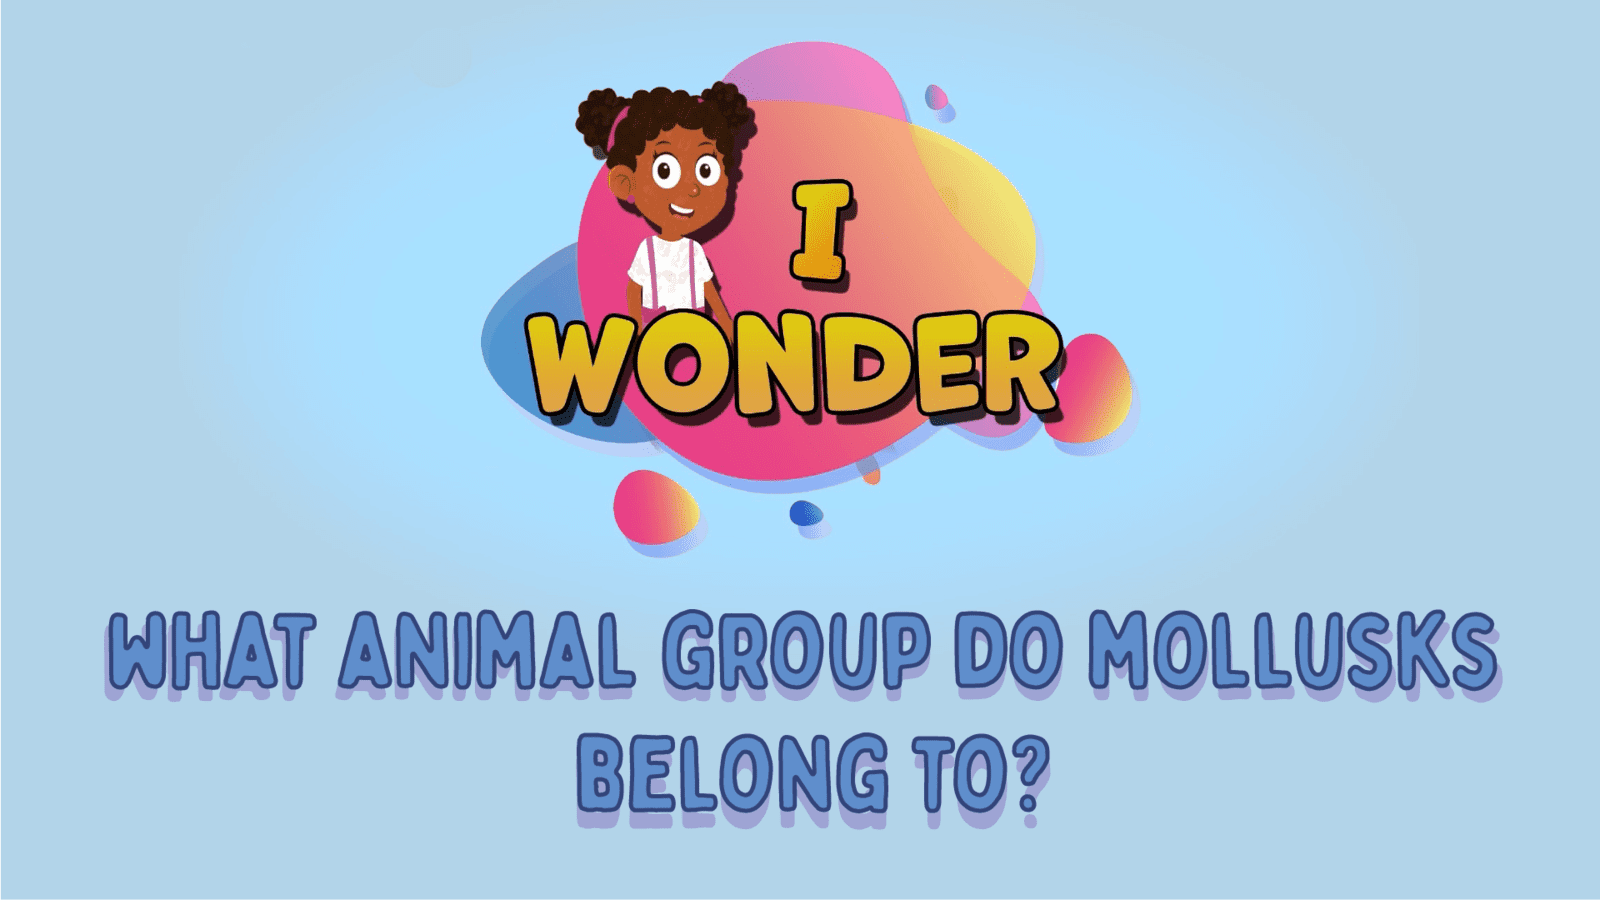 What Animal Group Do Mollusks Belong To?